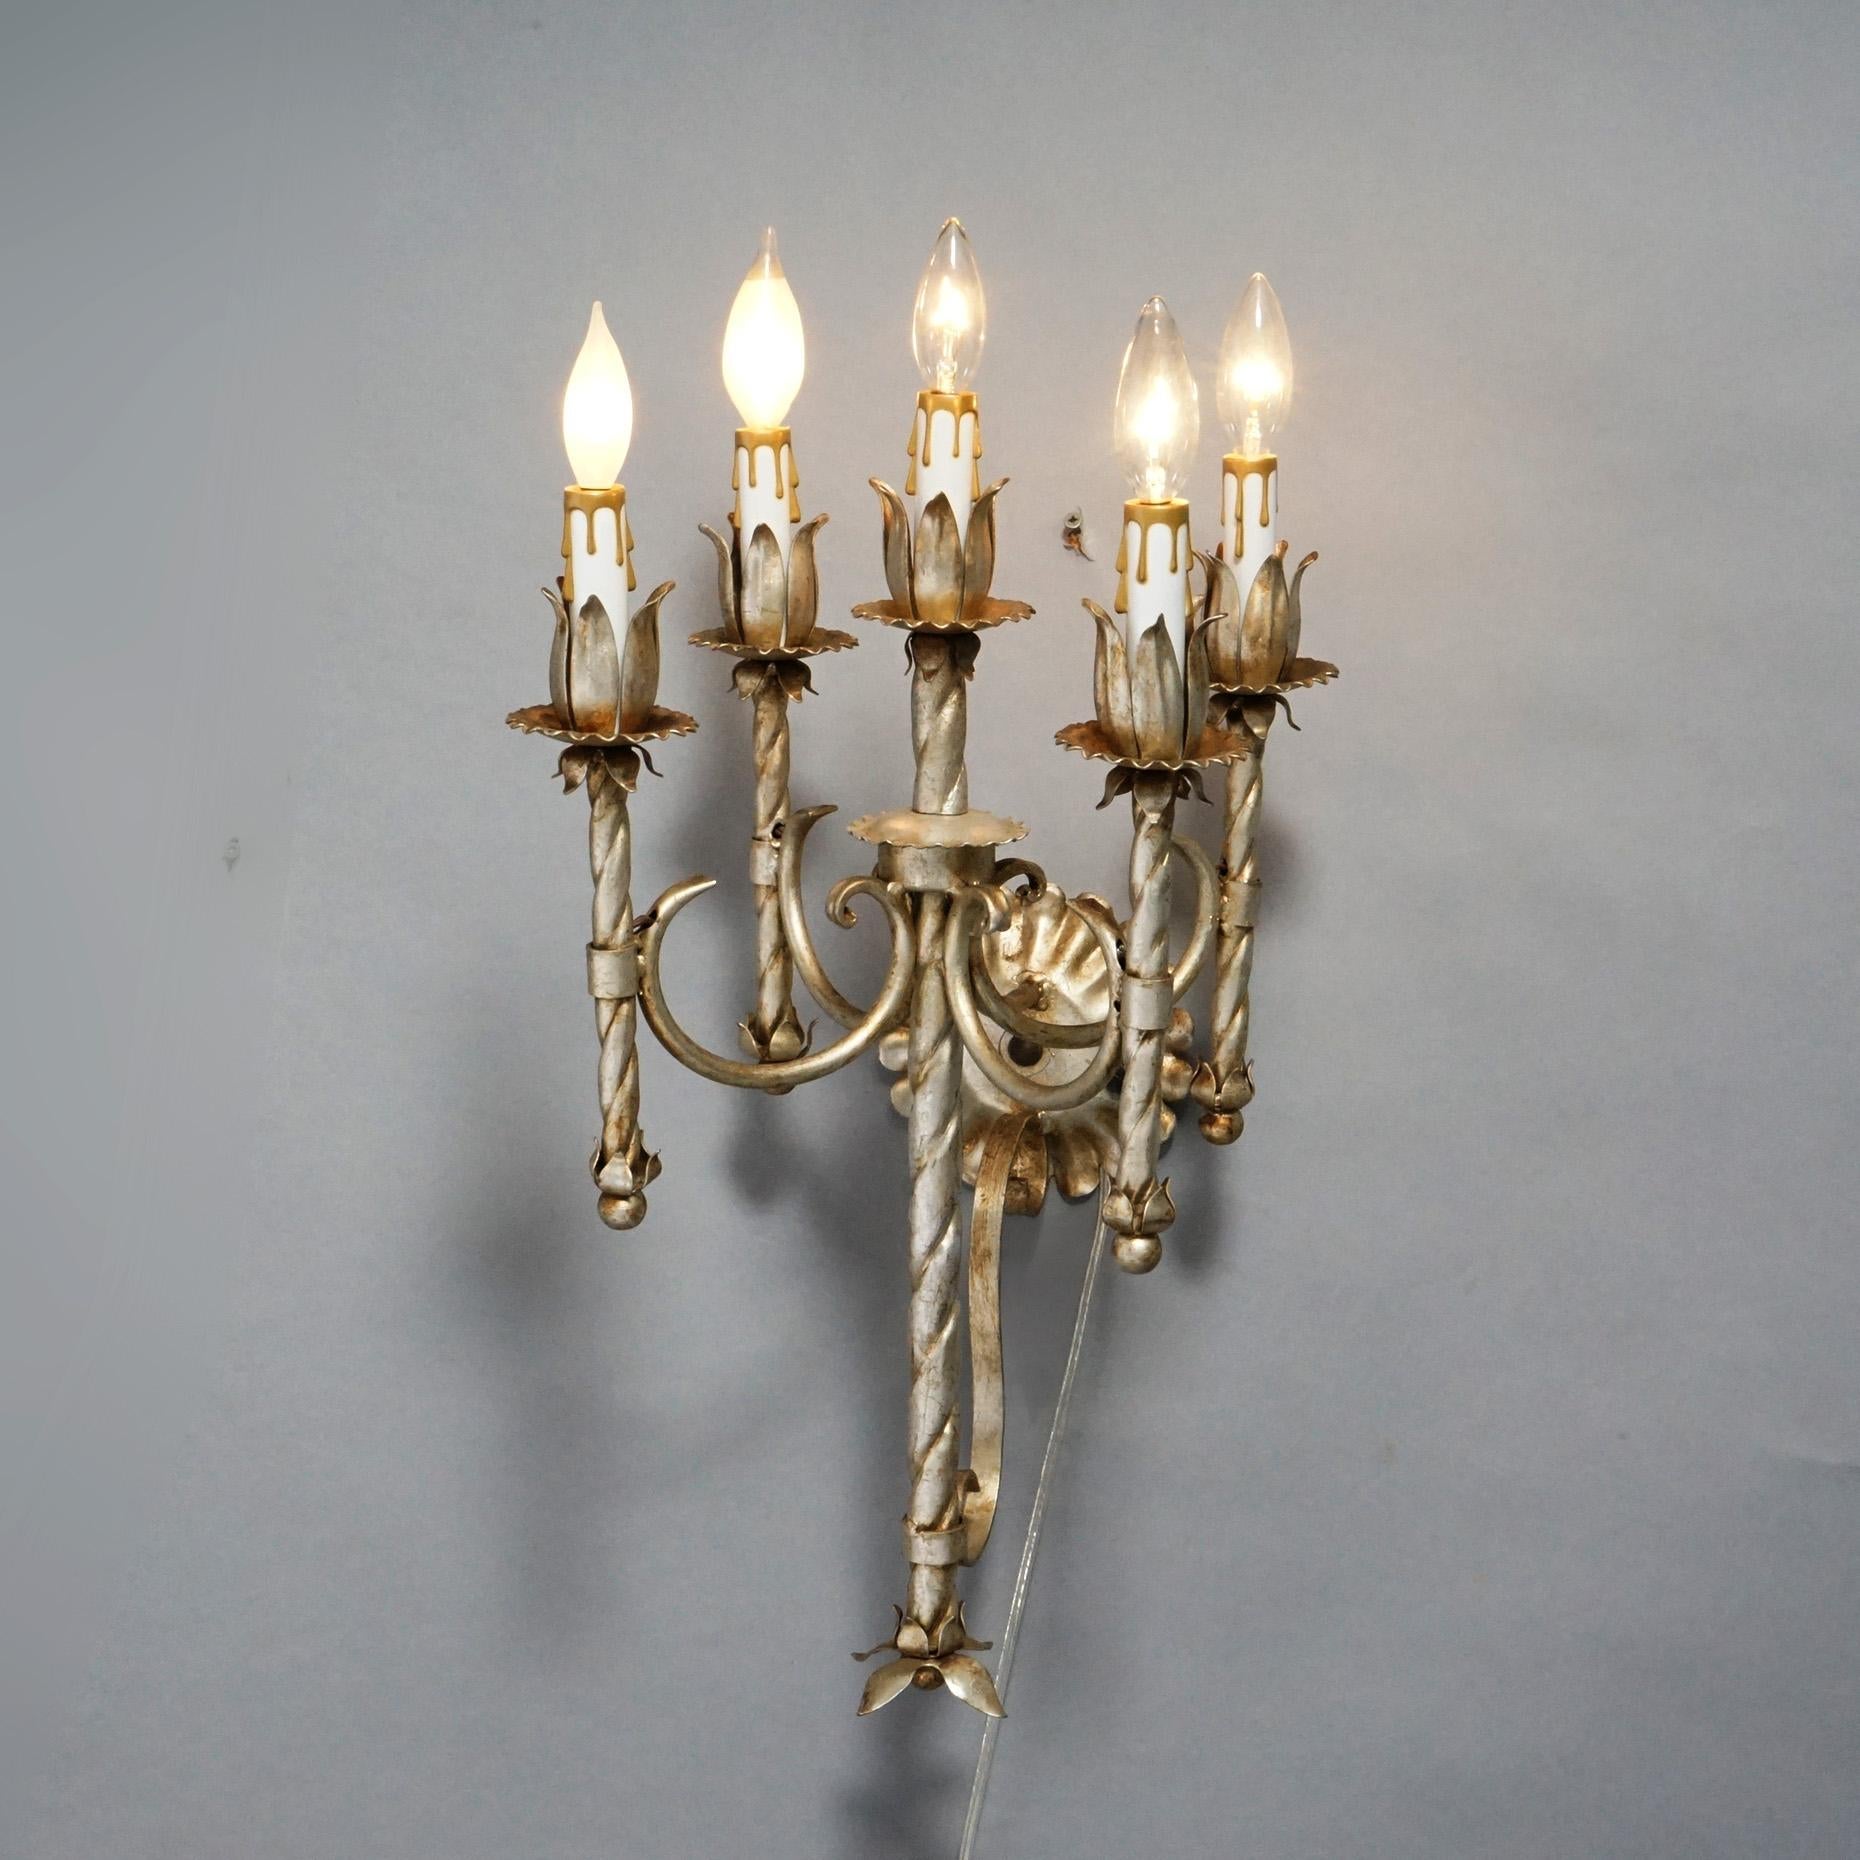 Antique Arts & Crafts Gothic Silvered Finish Candelabra Wall Sconces 20th C. For Sale 3